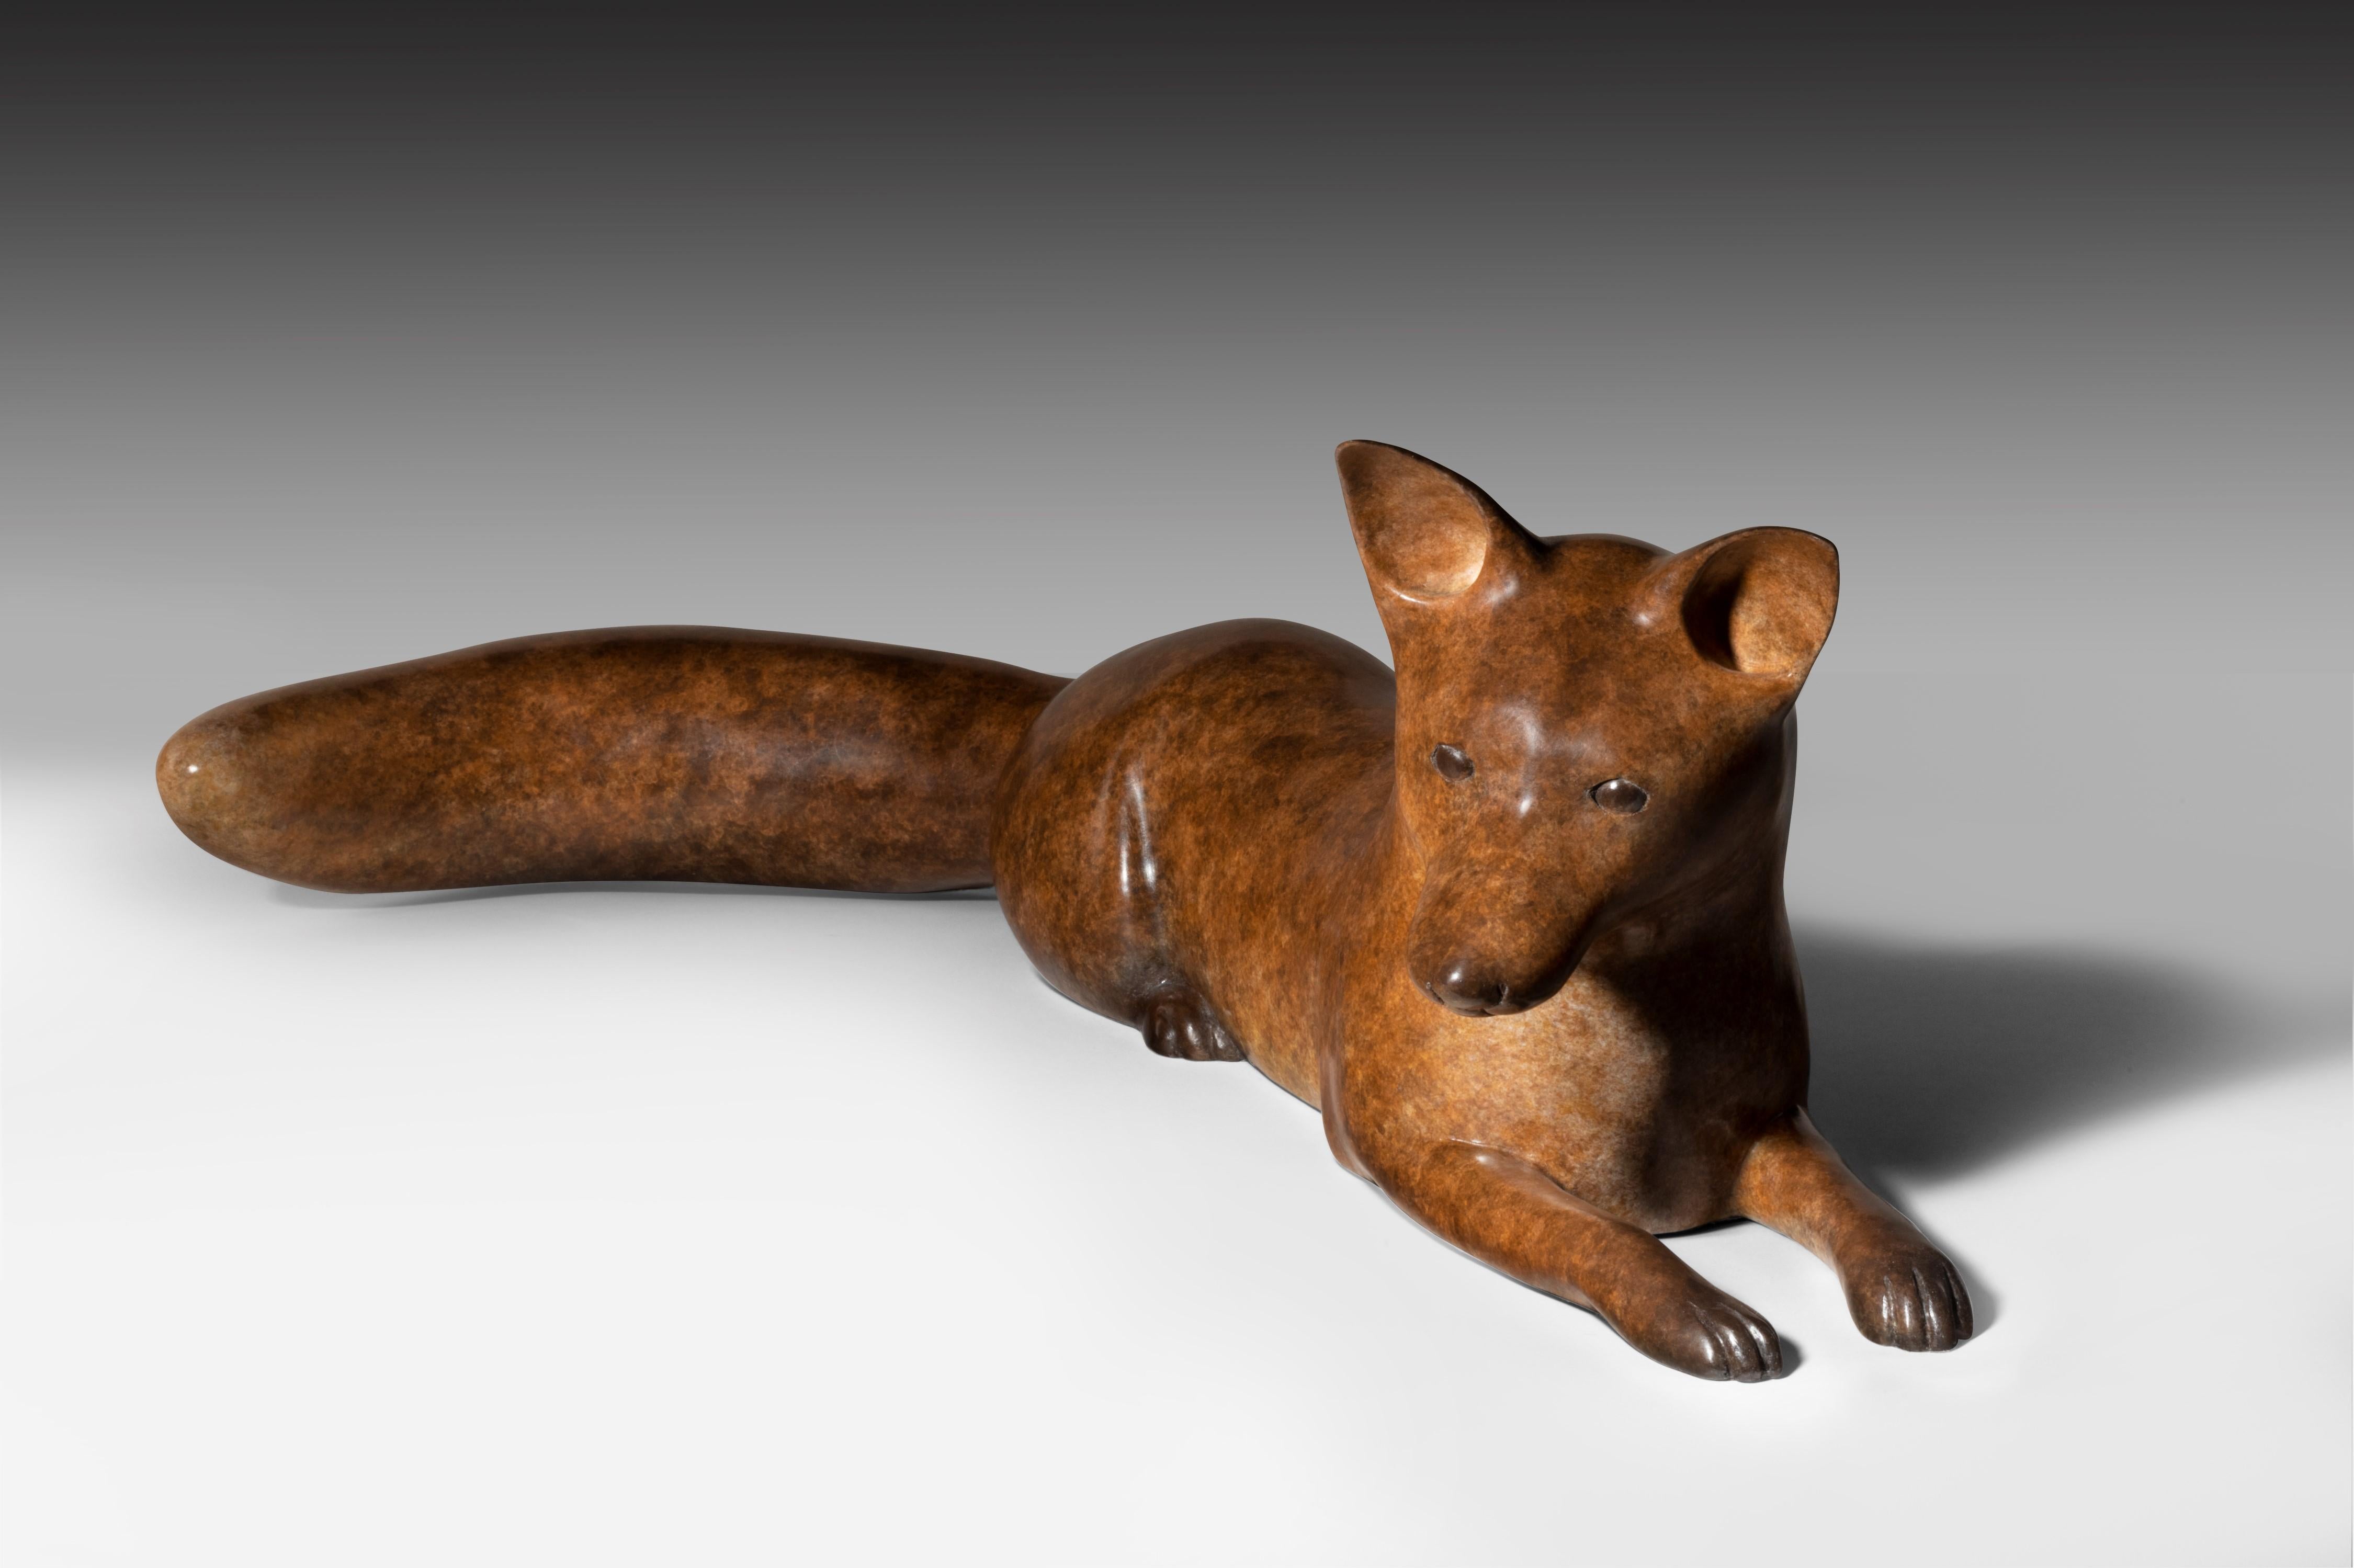 Contemporary Bronze Wildlife Fox  Sculpture 'Lying Fox' by Richard Smith  - Gold Figurative Sculpture by Richard Smith b.1955